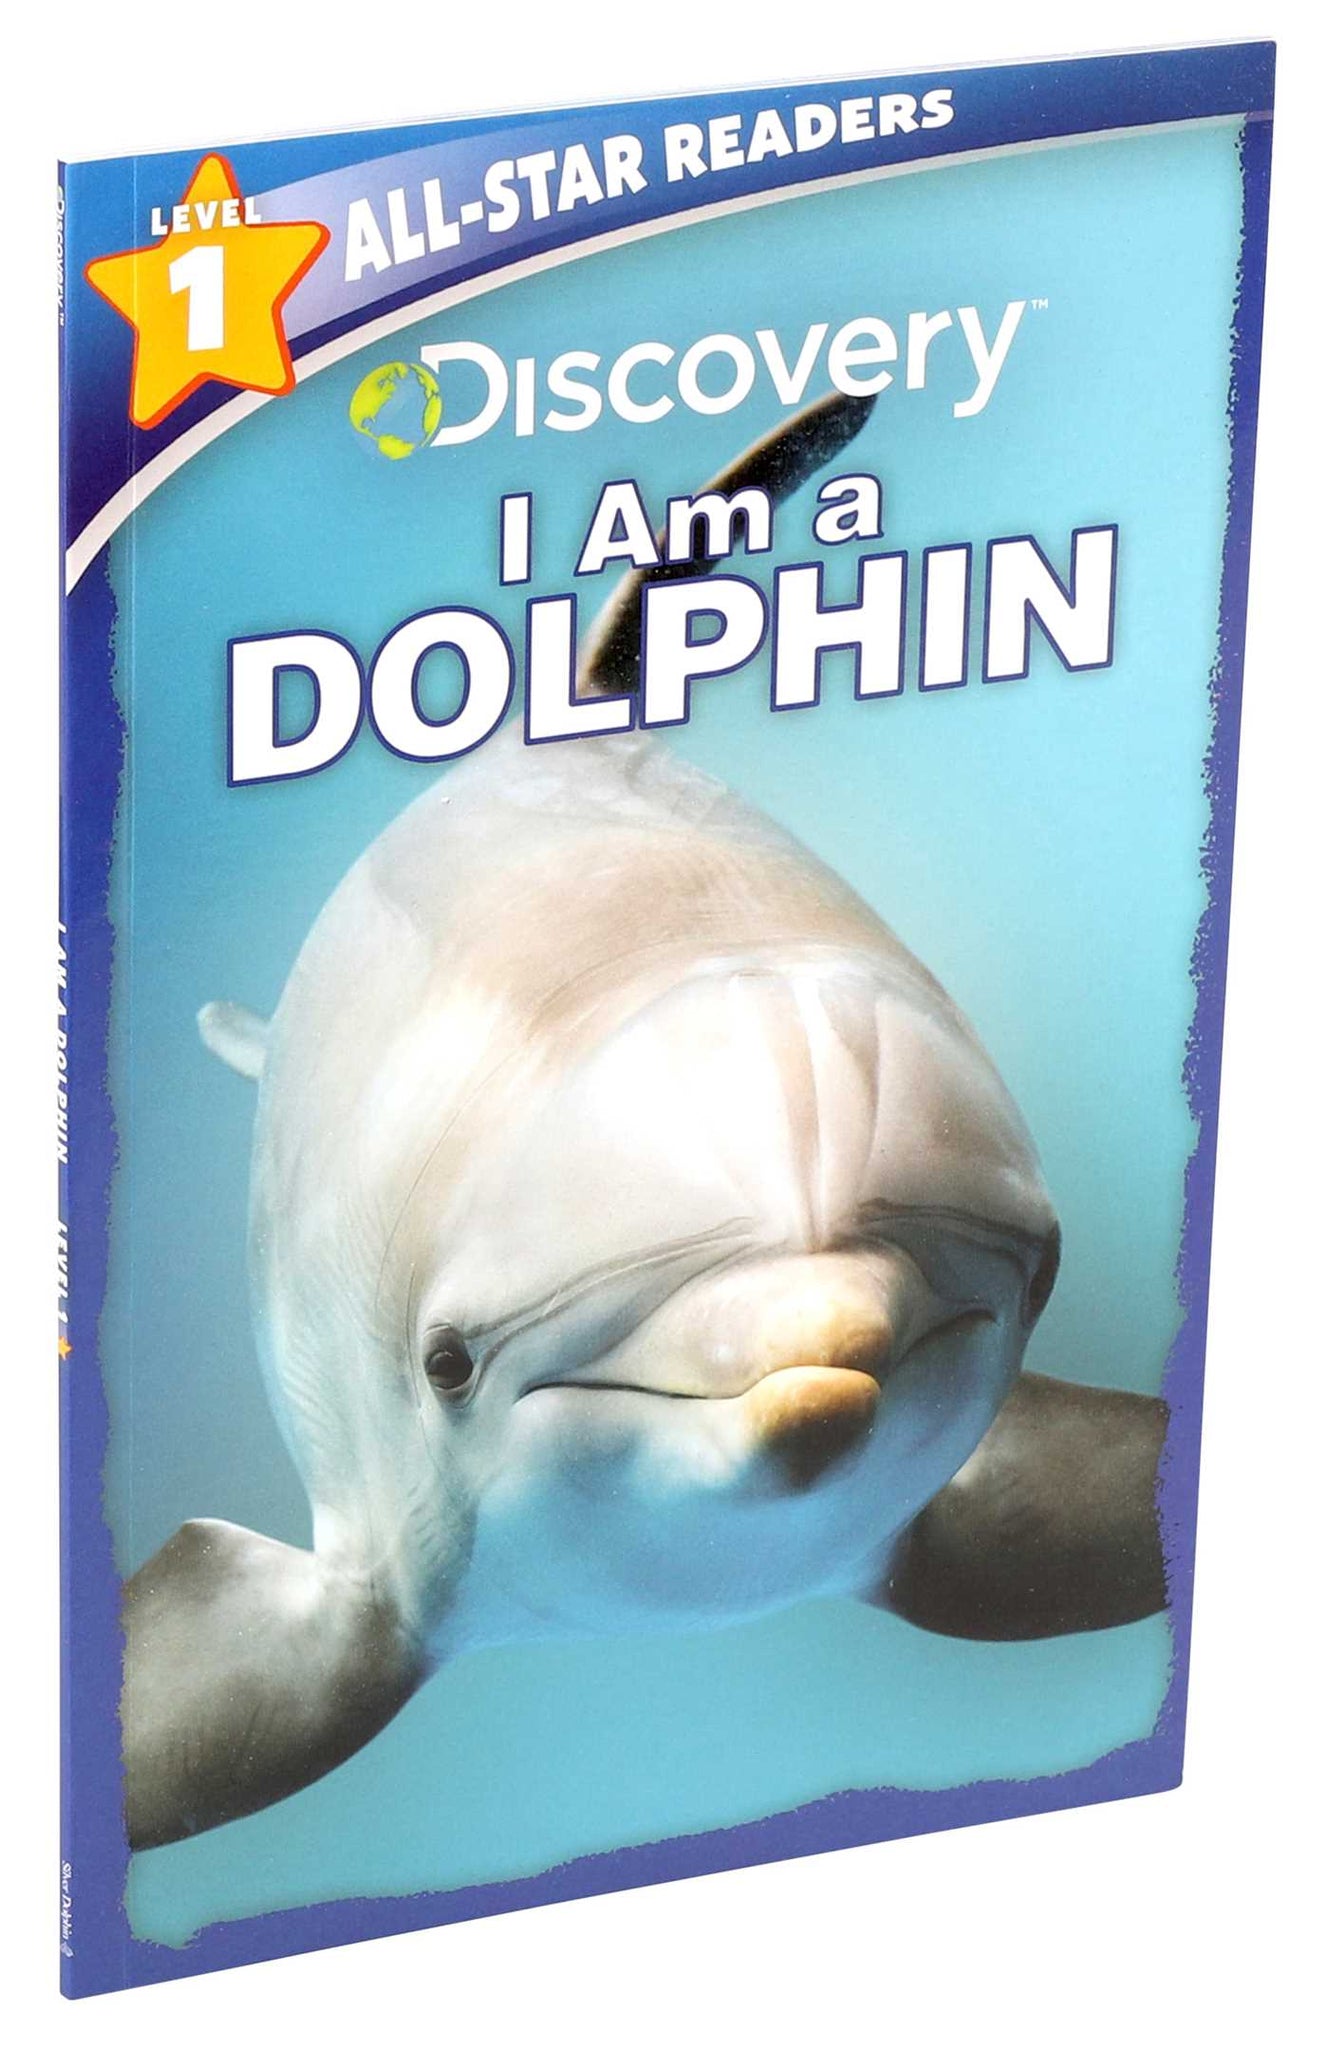 Discovery All Star Readers: I Am a Dolphin Level 1